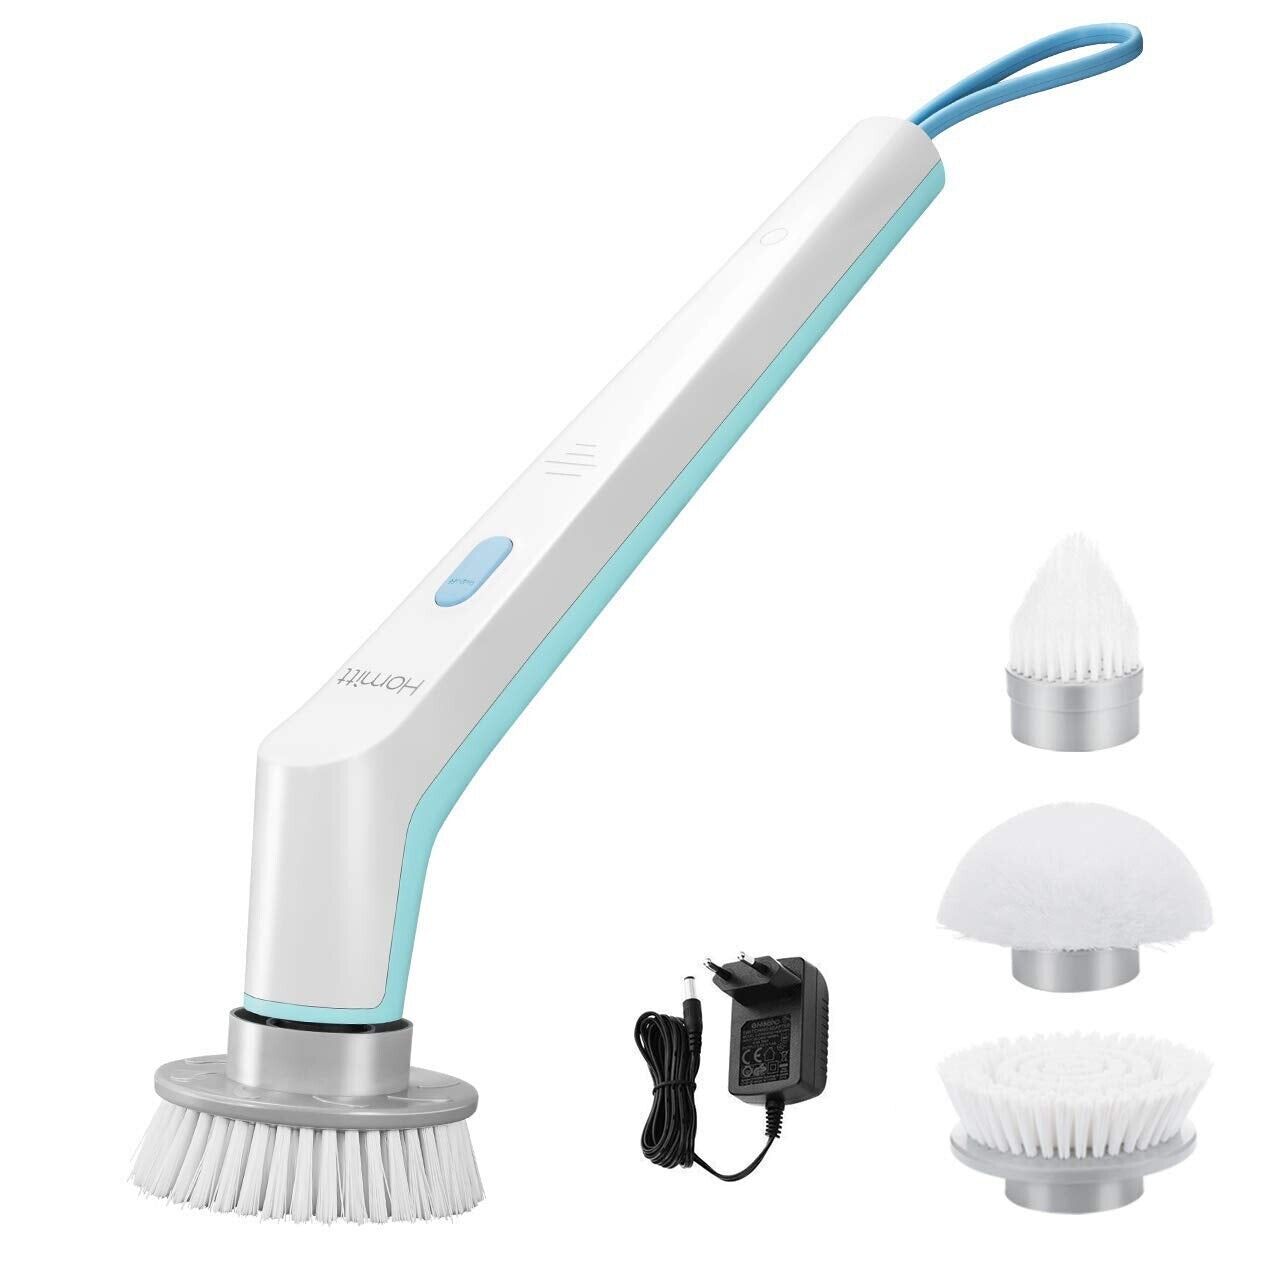 Electric Spin Scrubber, Handheld Power Scrubber with 5 Replaceable Brush  Heads, Lightweight & Portable Shower Brush for Cleaning Tub, Kitchen,  Cordless Bathroom Scrubber with Powerful Motor 